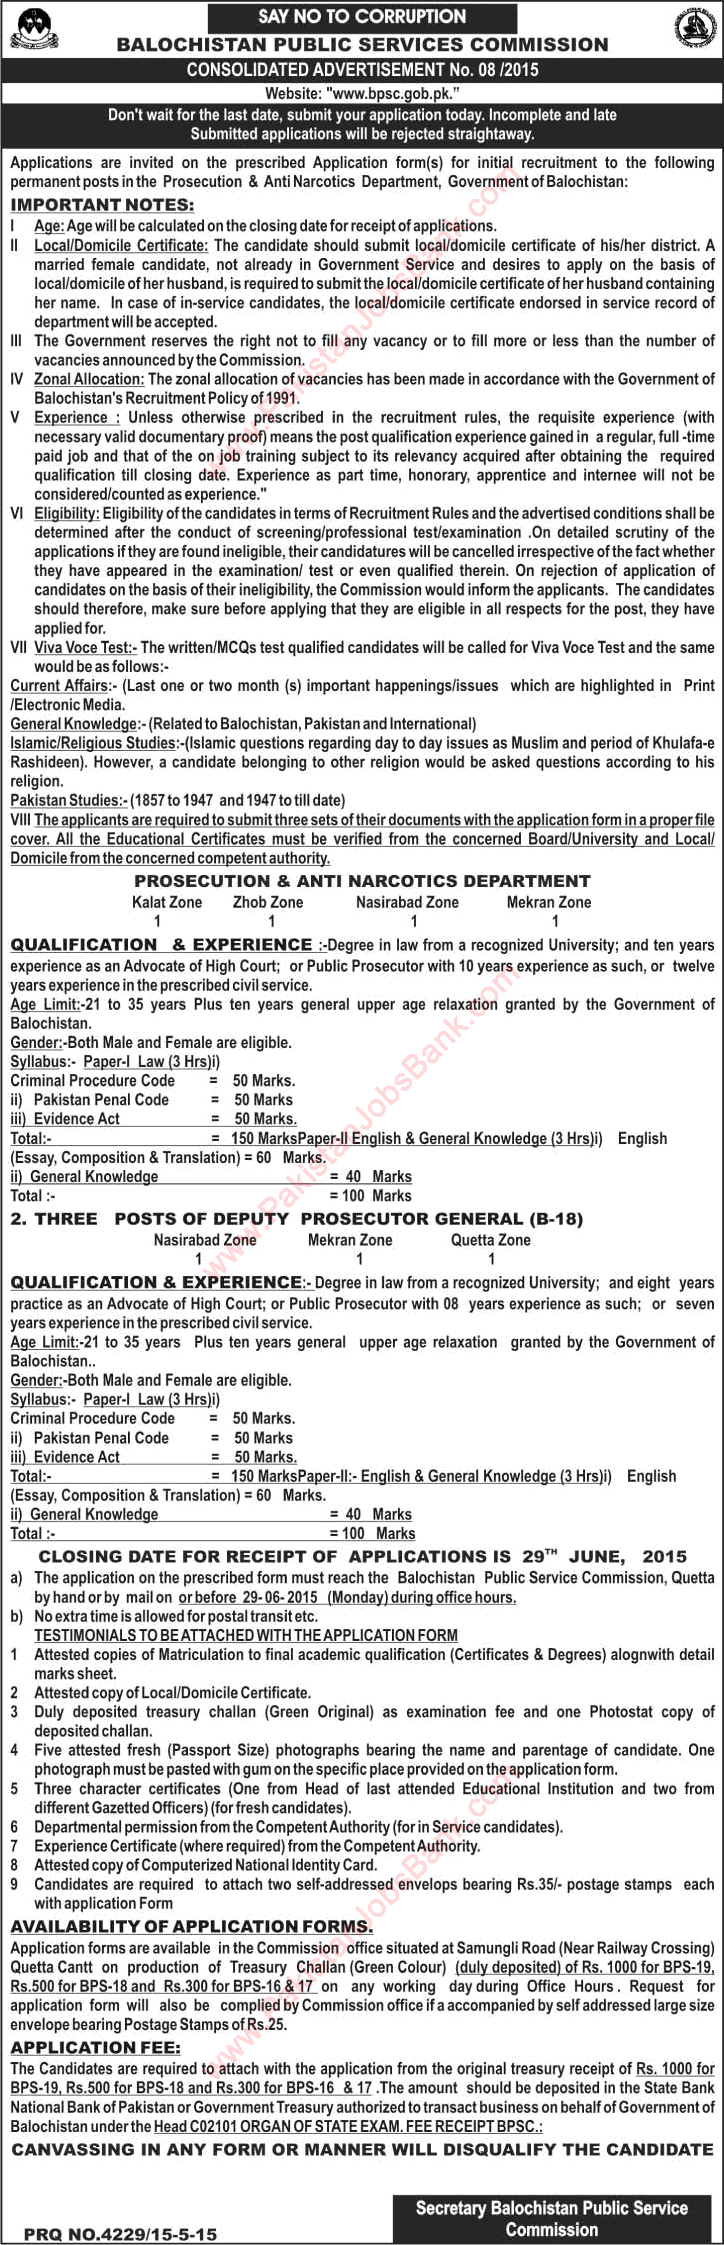 BPSC Jobs May 2015 Deputy / Prosecutor General Consolidated Advertisement No. 08/2015 (8/2015) Latest